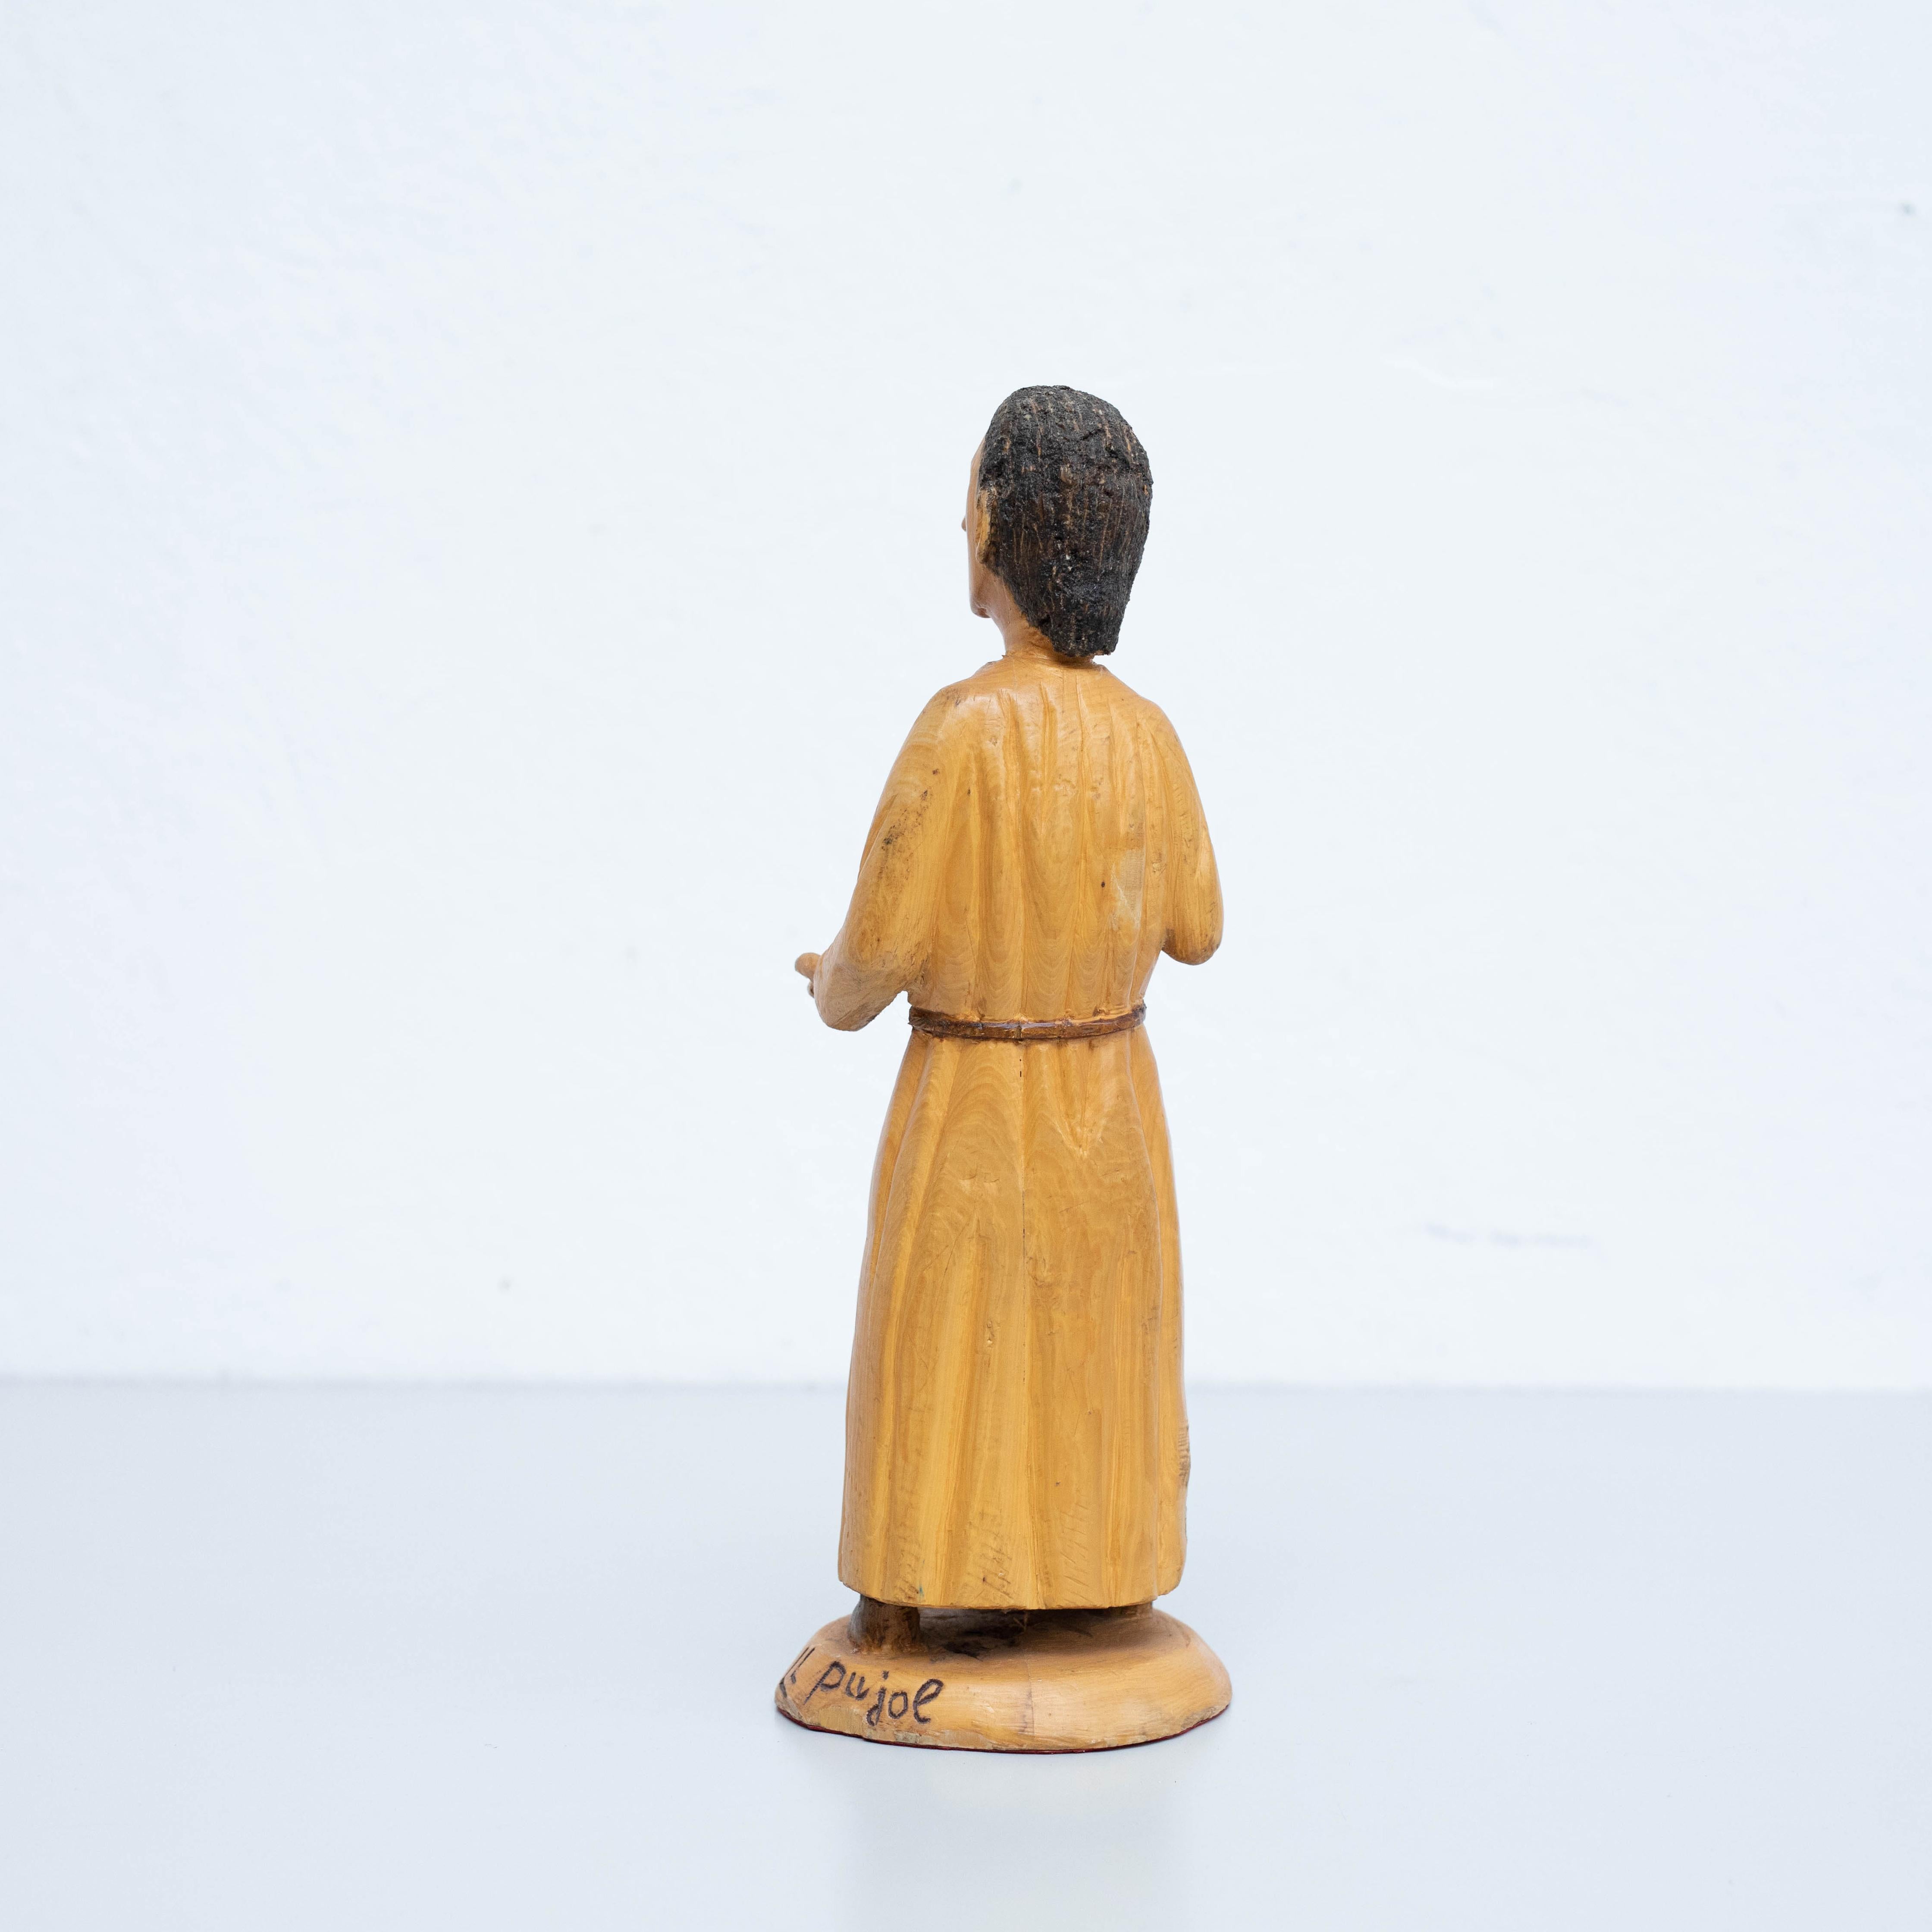 Traditional Wooden Pastoral Art Saint Joan Sculpture In Good Condition For Sale In Barcelona, Barcelona